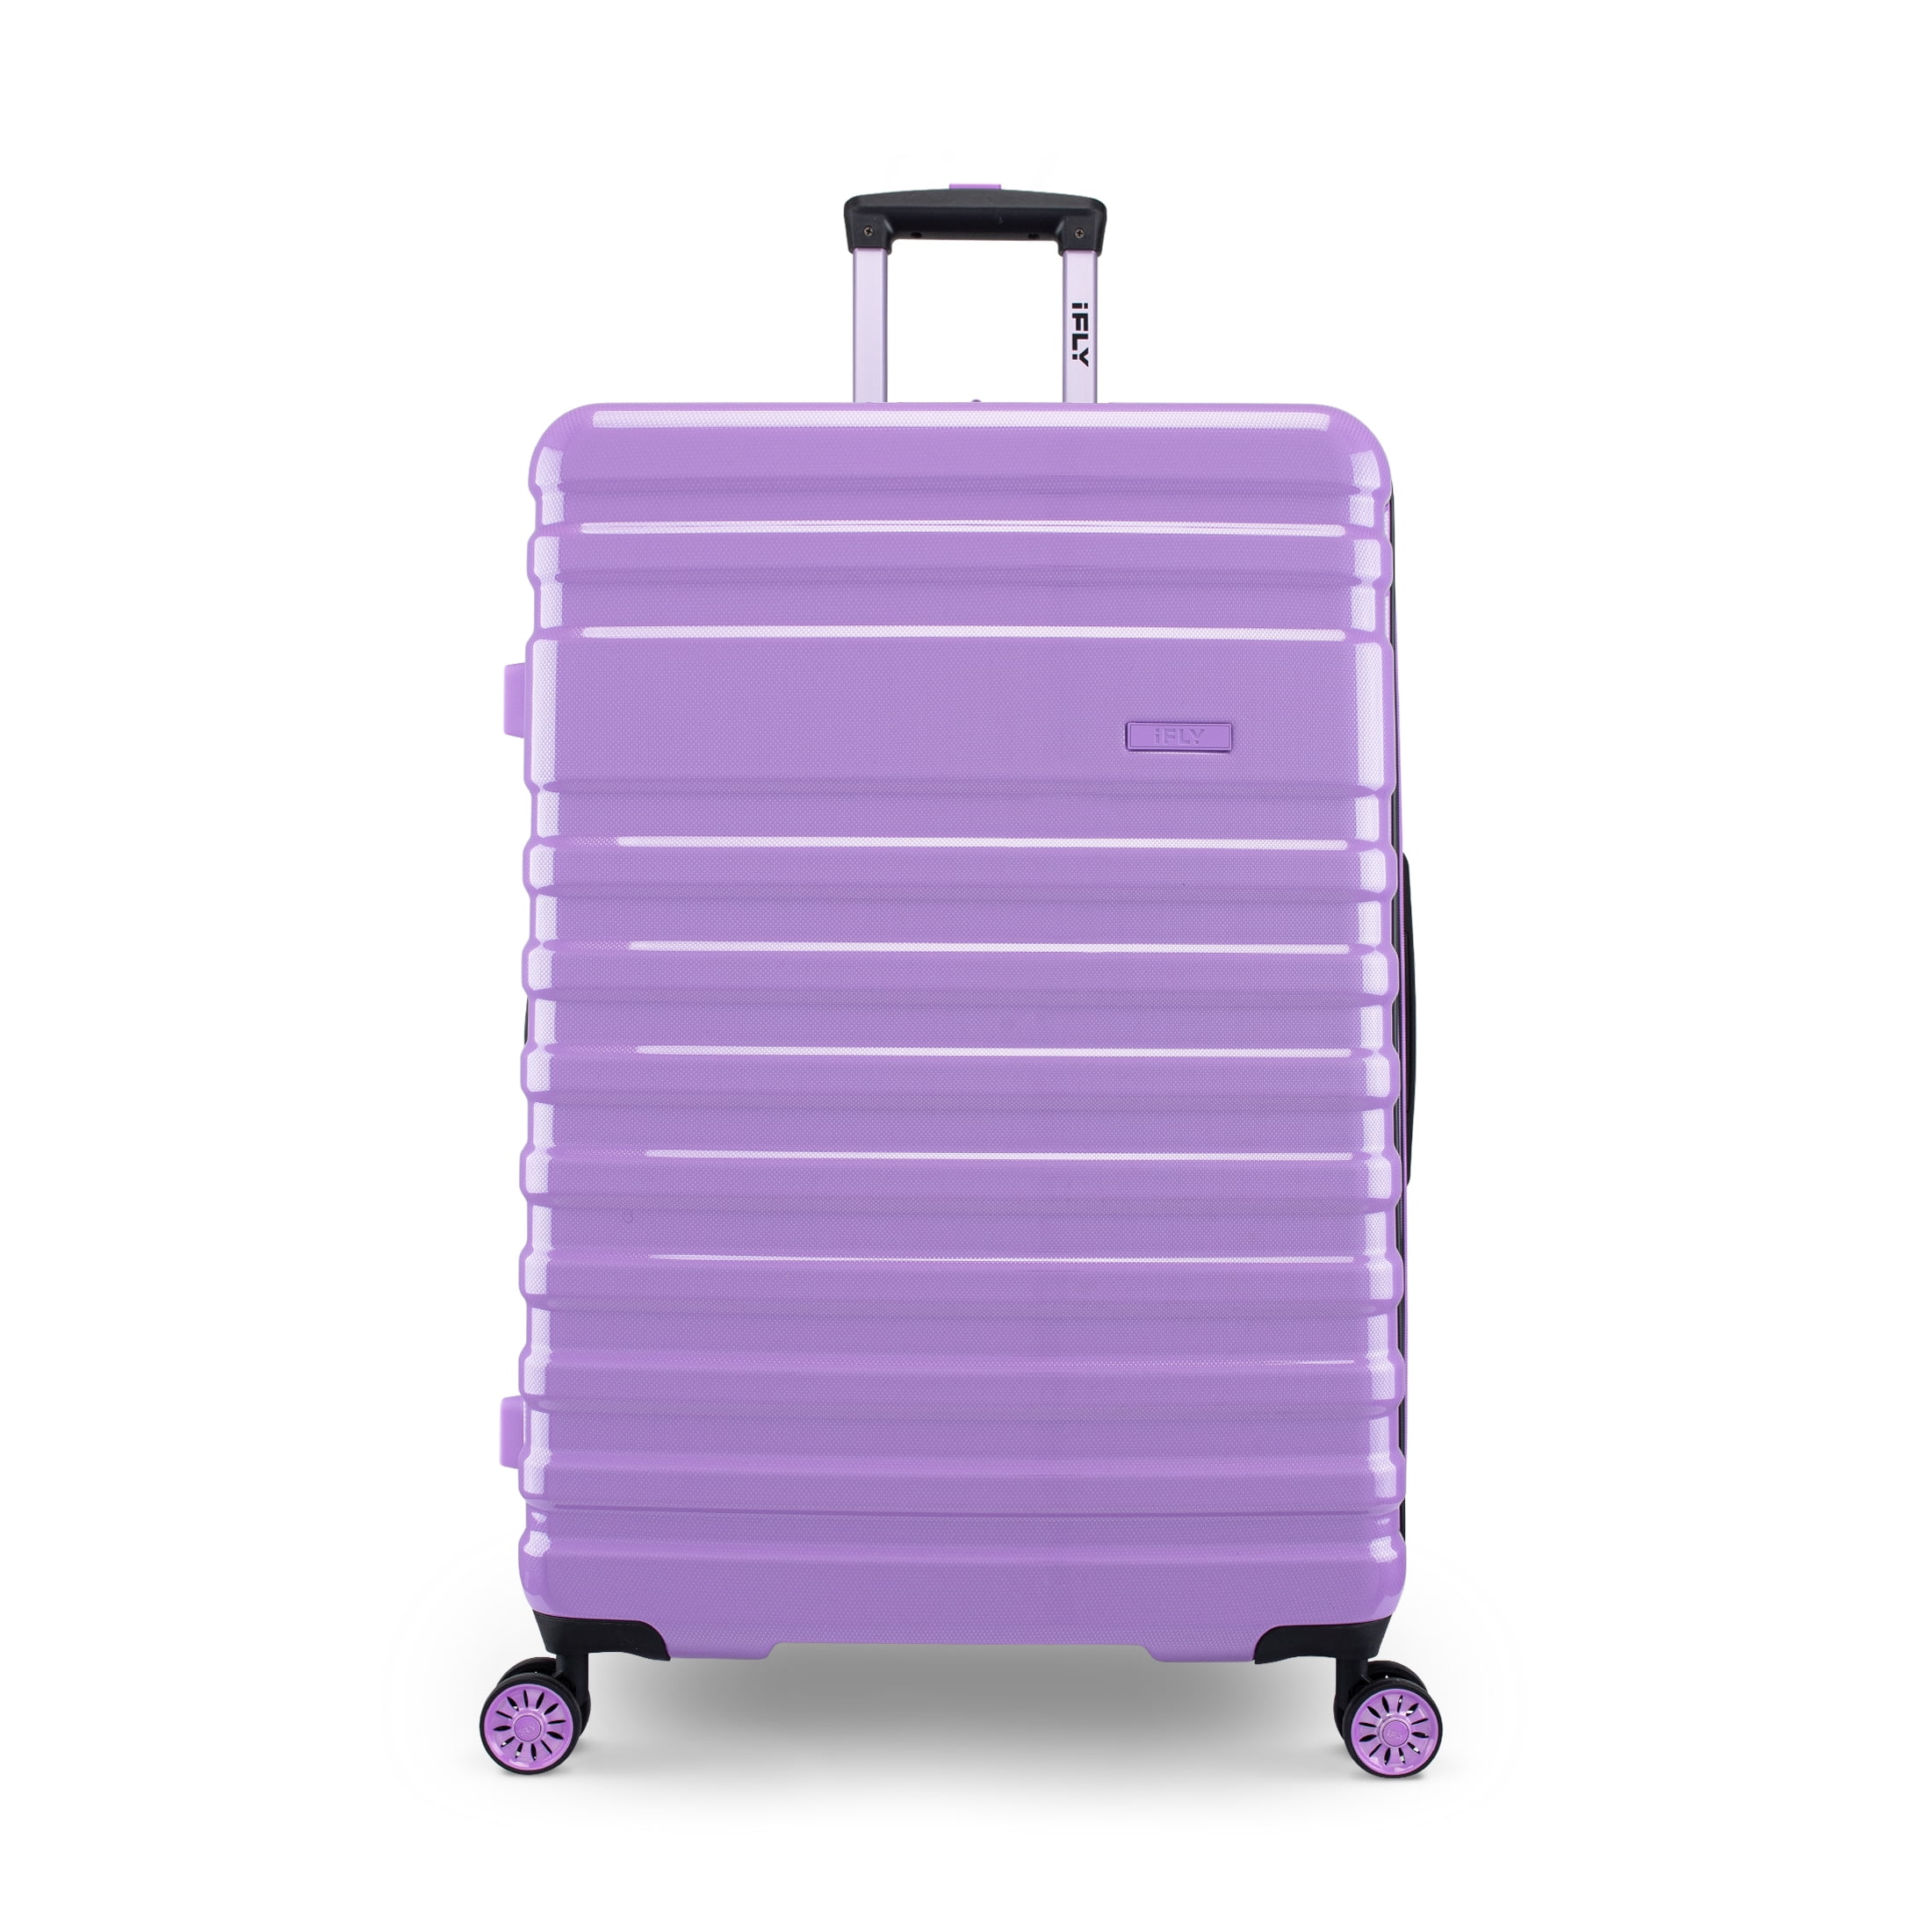 iFLY Spectre Versus Purple Cosmo Hardside Luggage 28 inch Checked ...